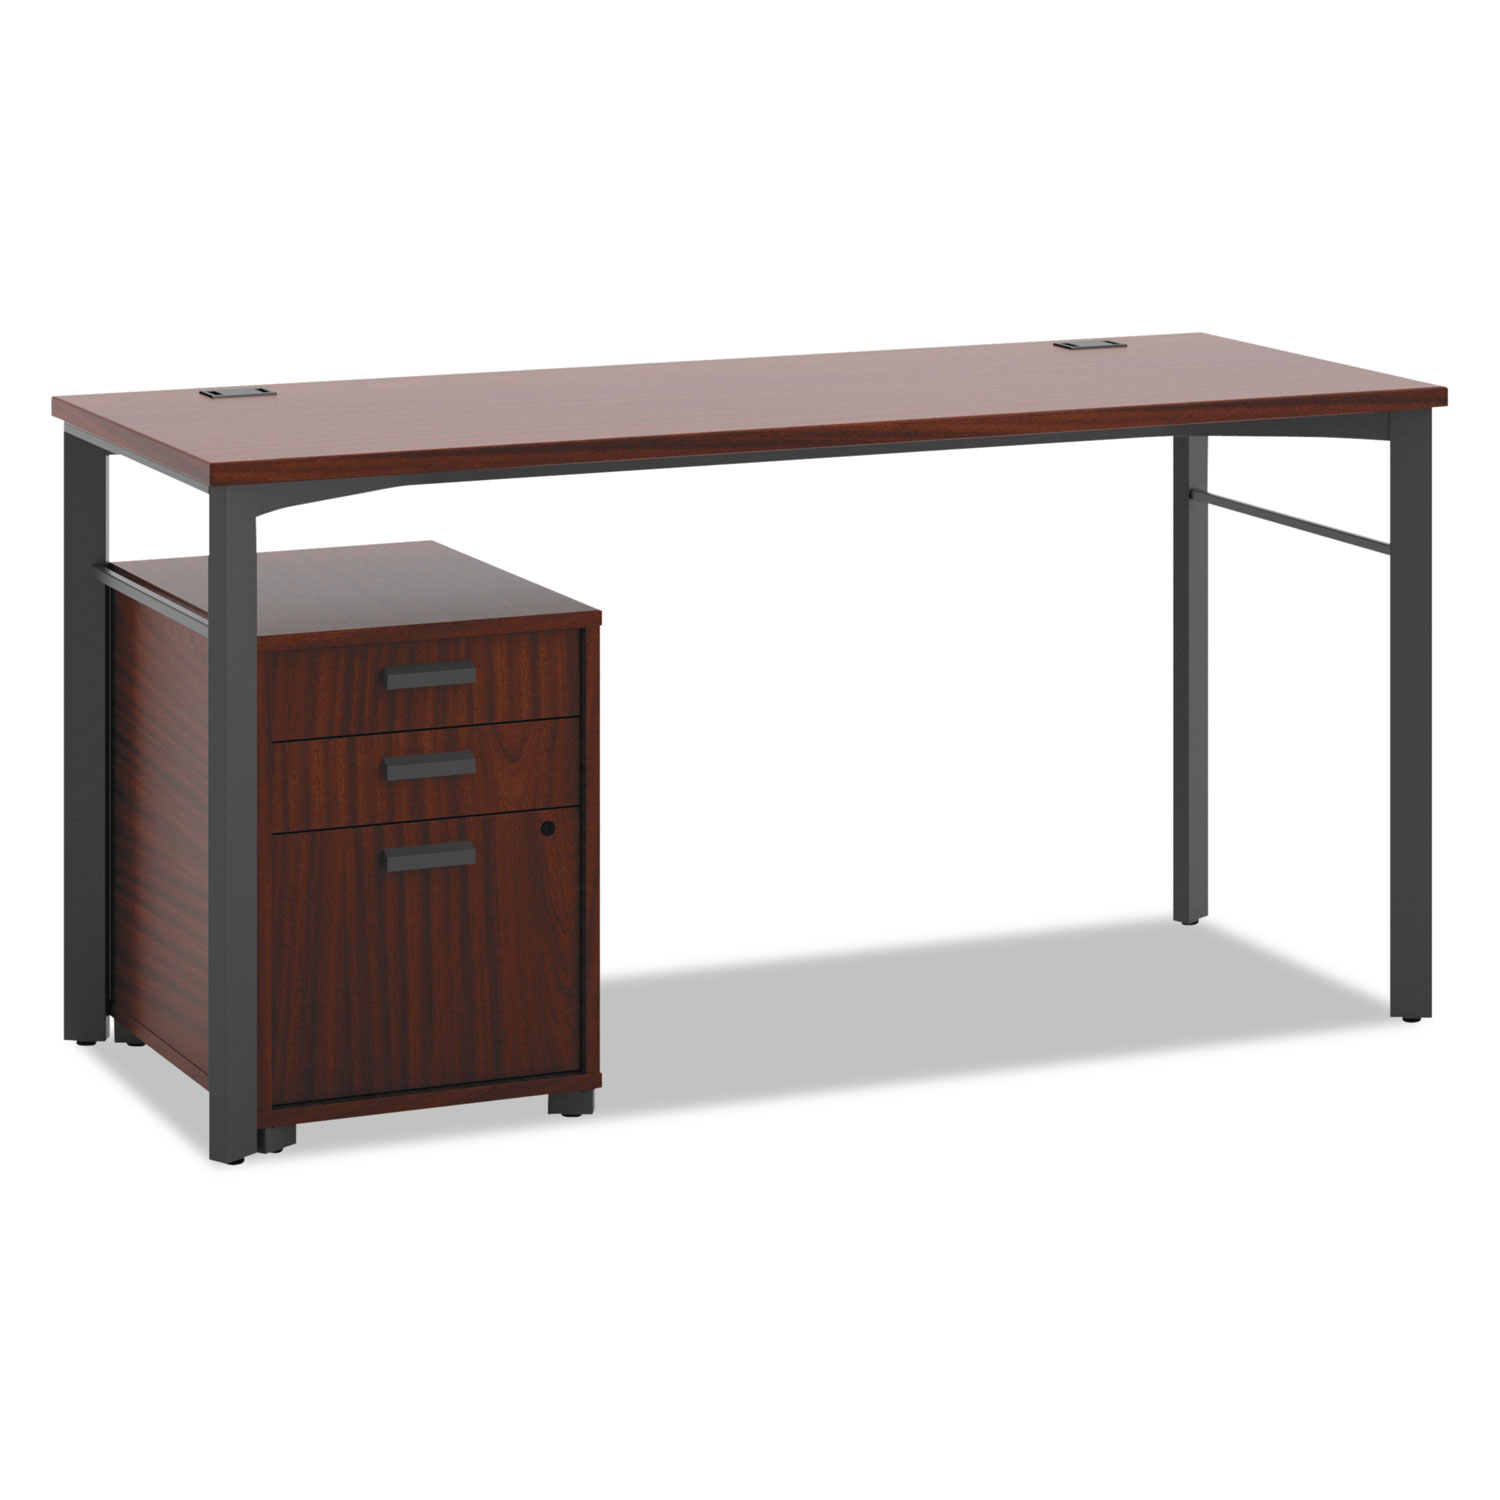 Manage Series Table Desk with Pedestal, 60w x 23-1/2d x 29-1/2h, Chestnut